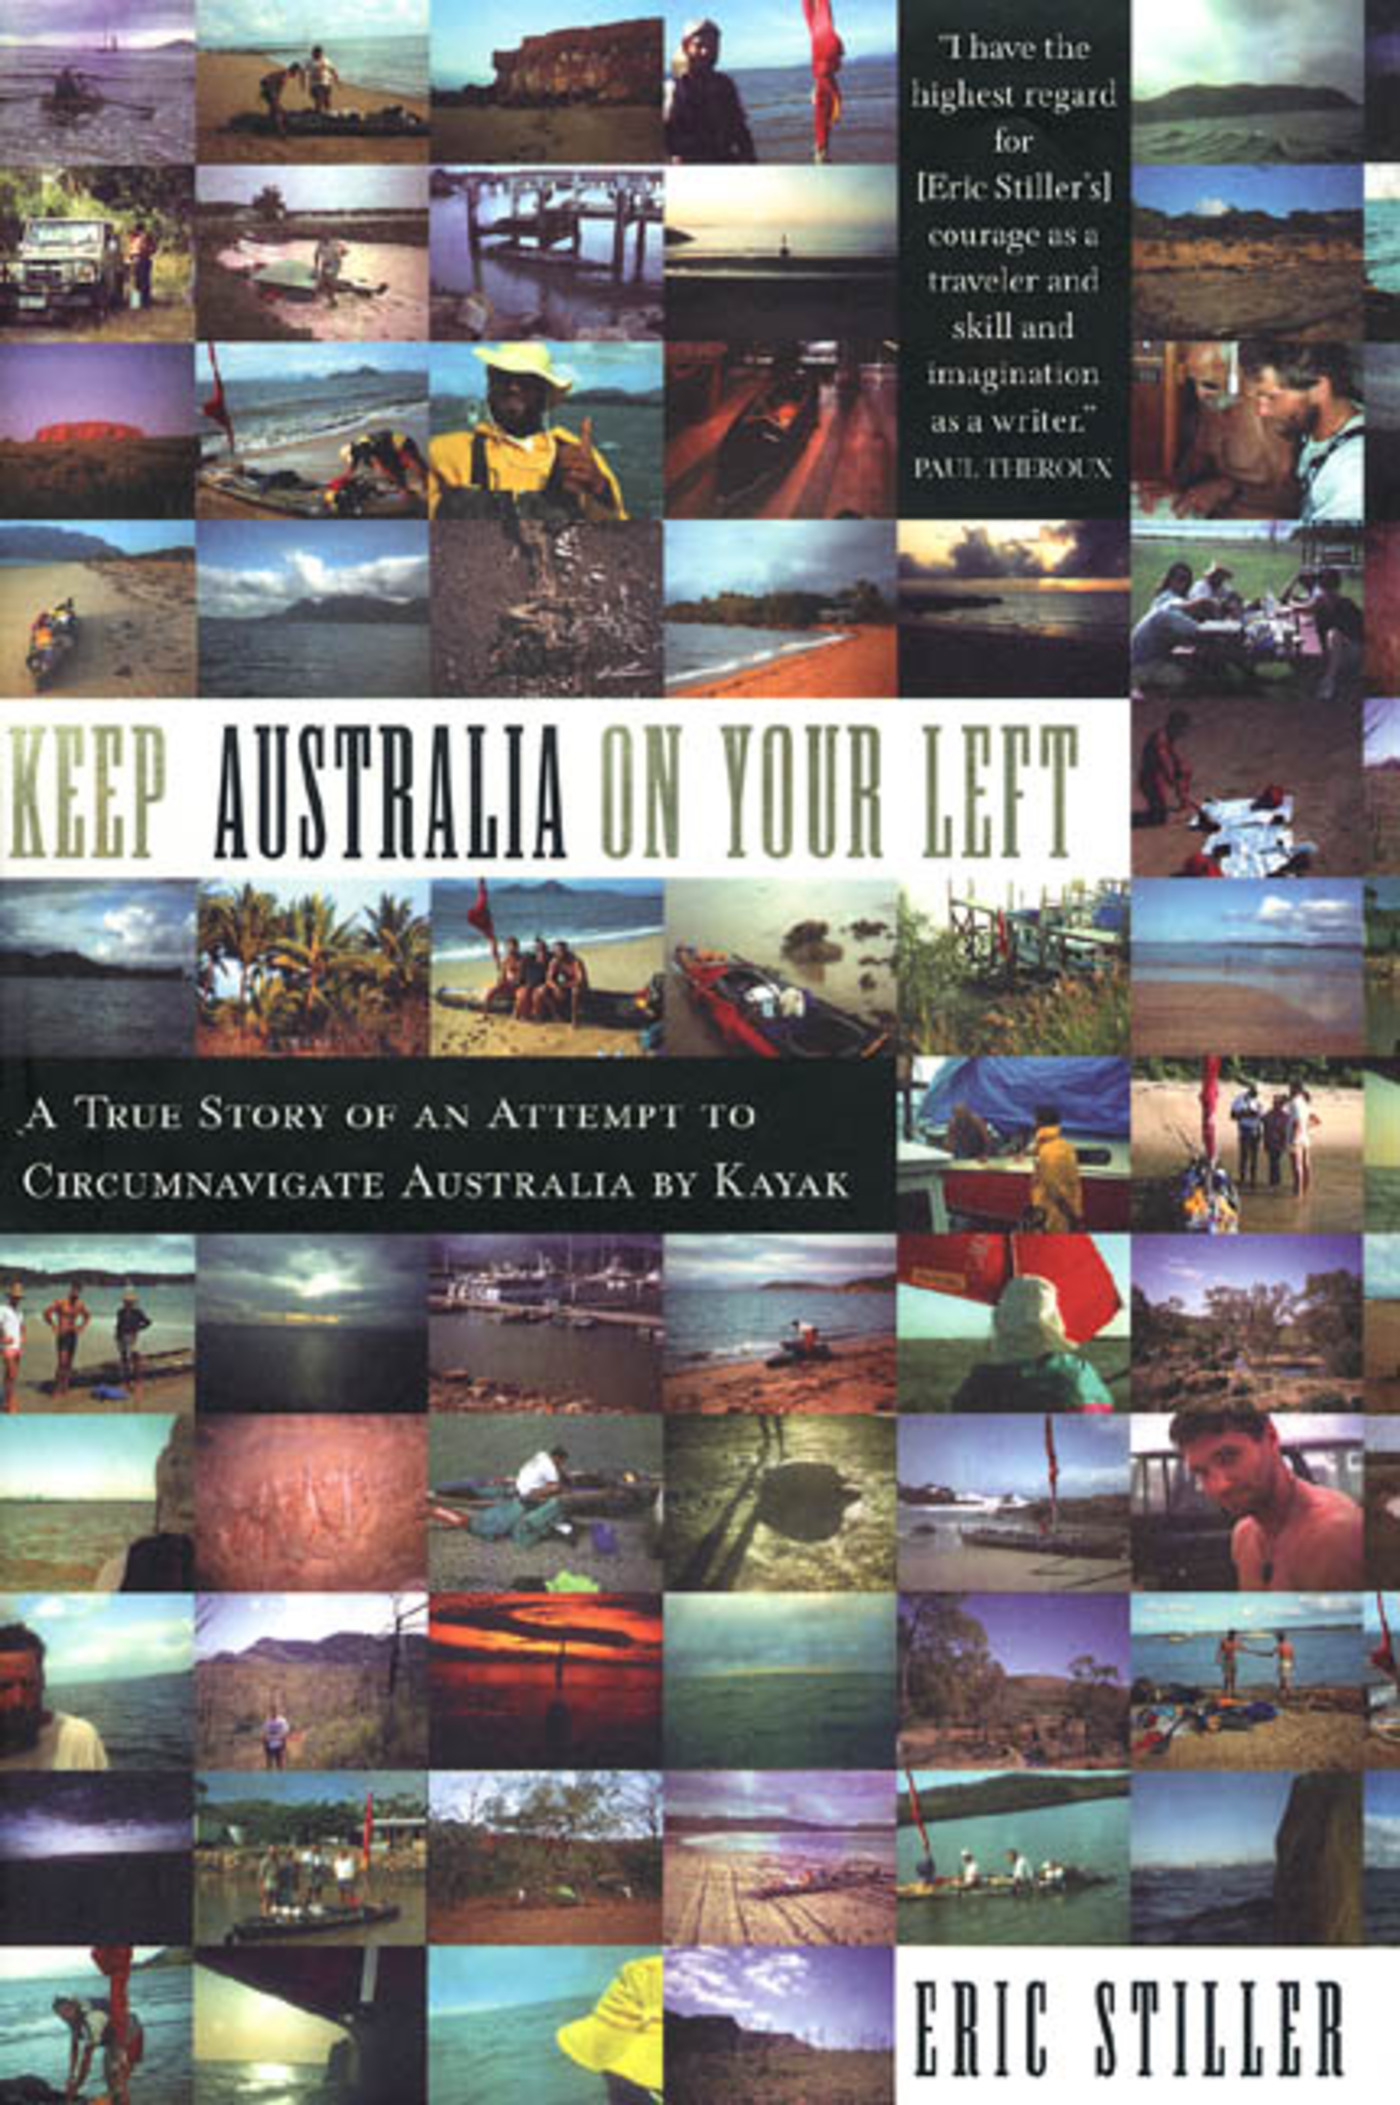 Keep Australia On Your Left : A True Story of an Attempt to Circumnavigate Australia by Kayak by Eric Stiller